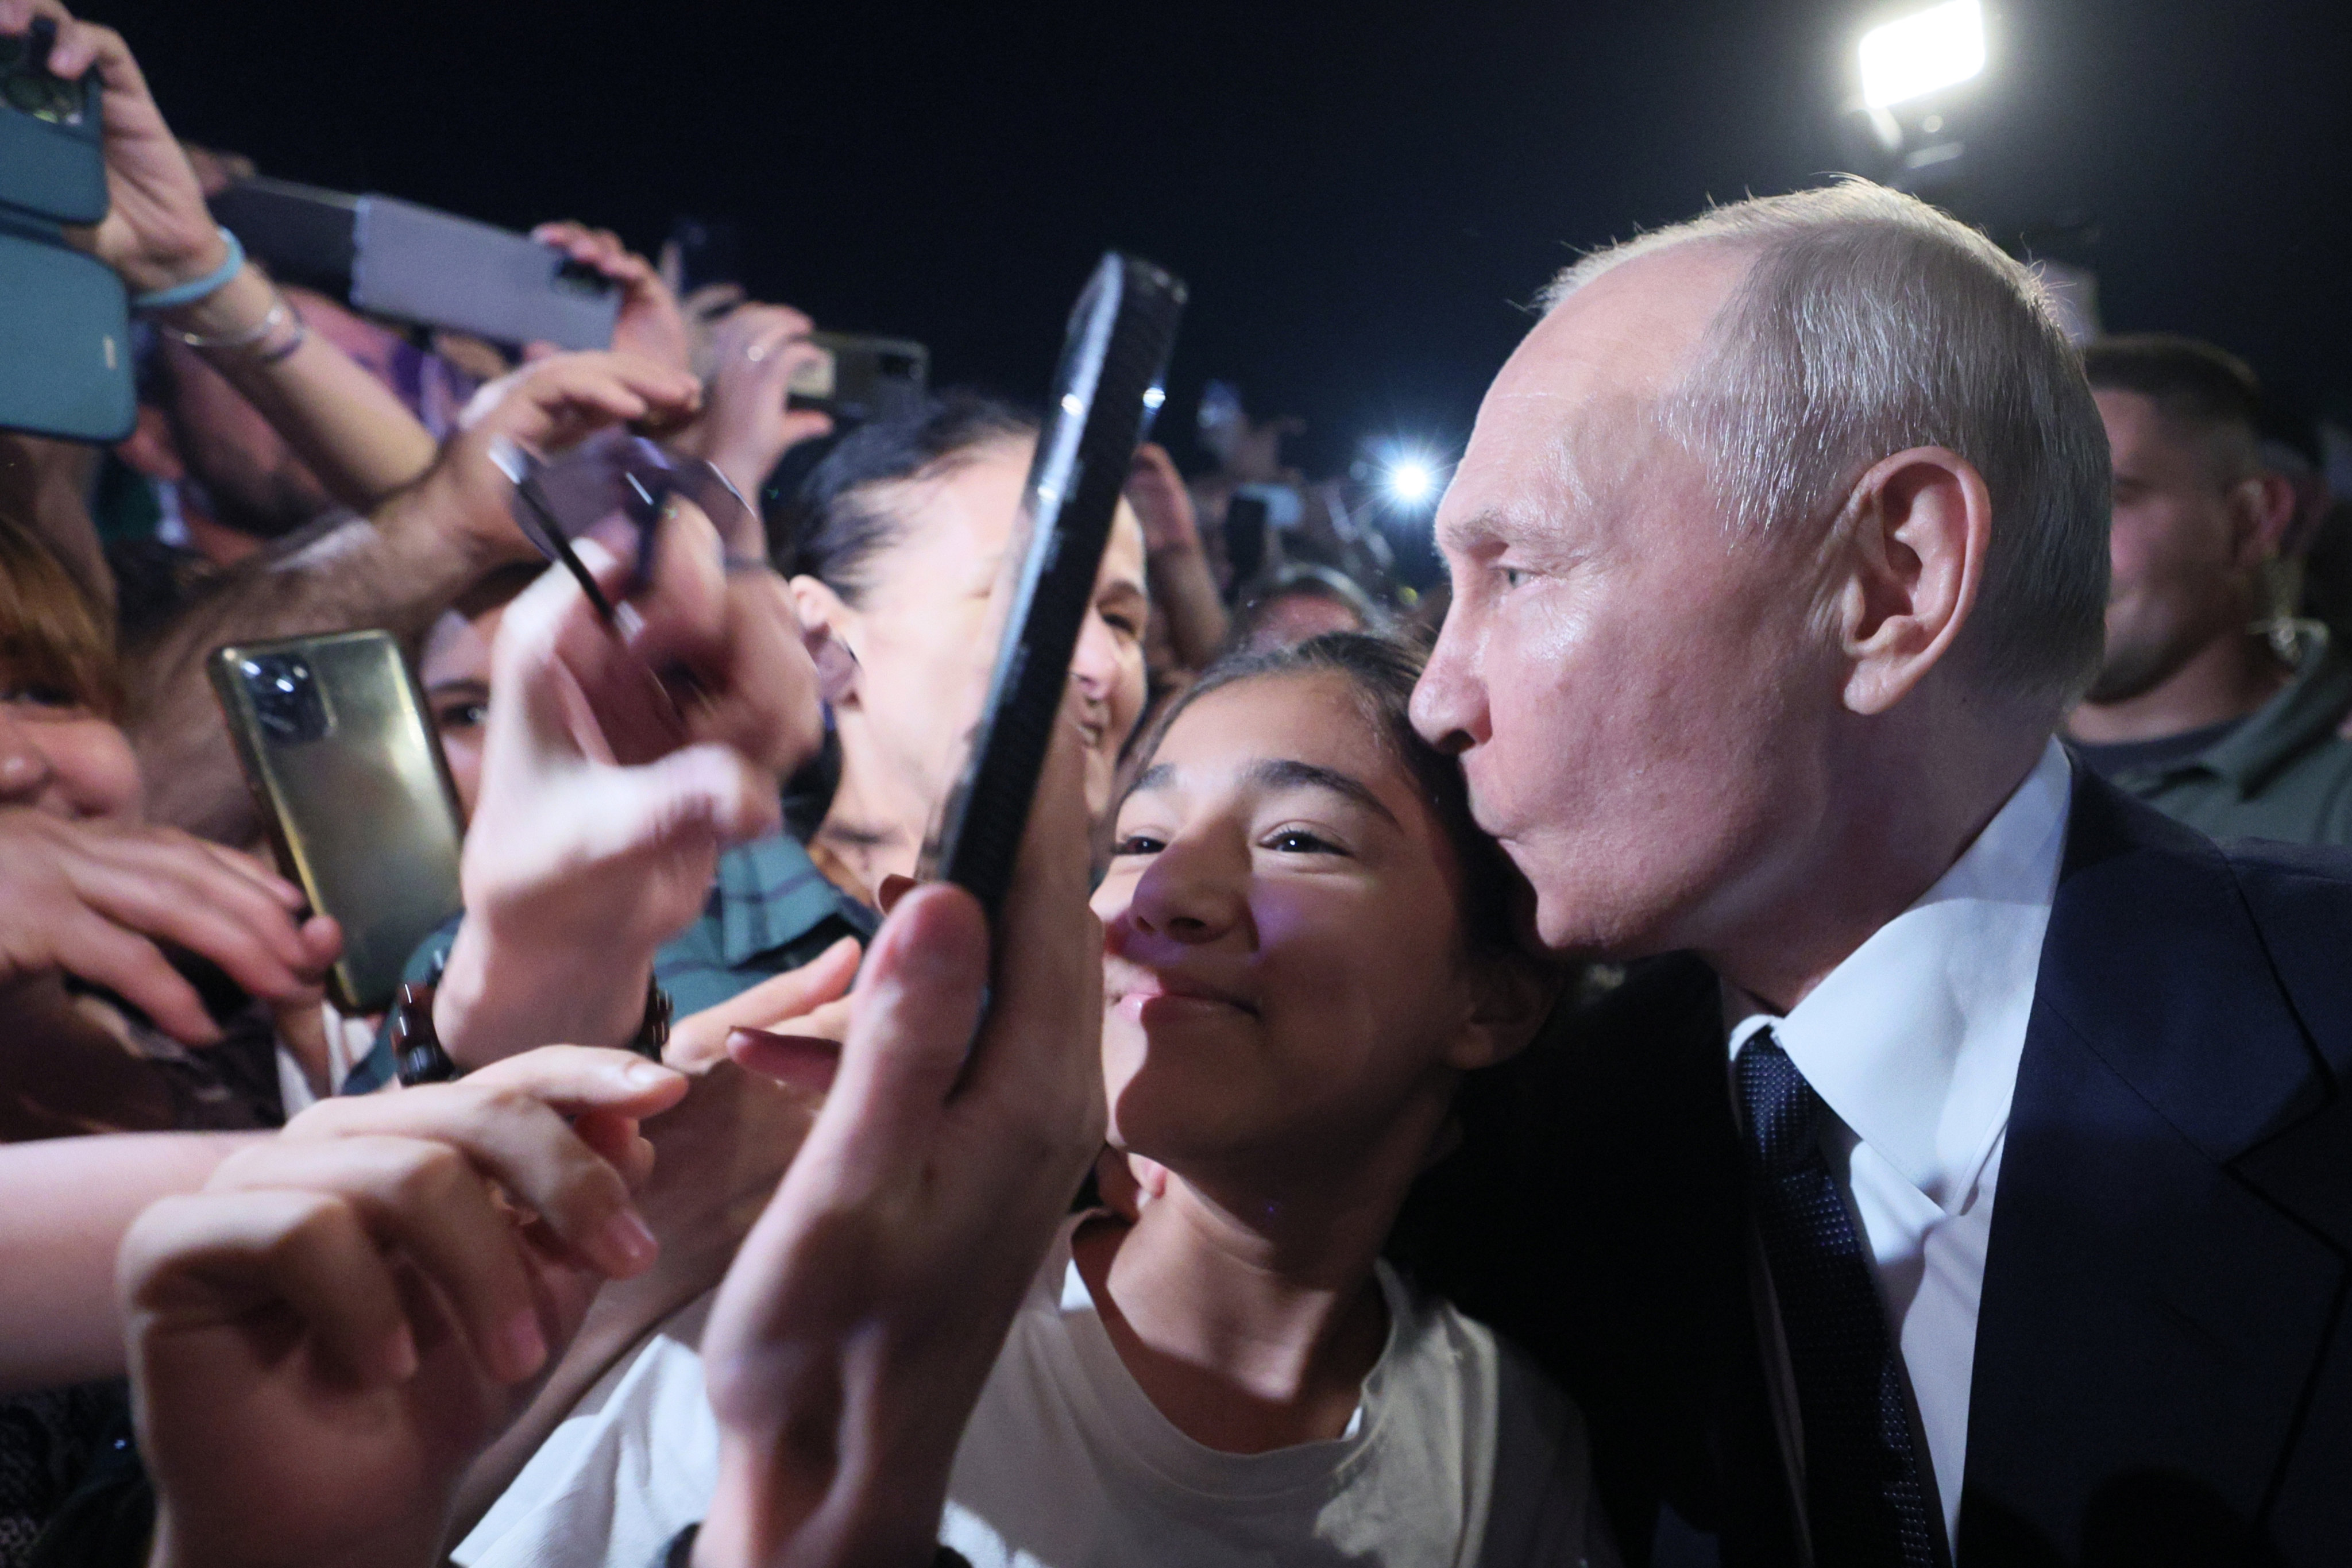 Russian President Vladimir Putin kisses a girl on the head on Wednesday. It contrasted sharply with a strict Covid-19 quarantine regime the Kremlin long maintained for anyone due to meet the 70-year-old leader, to avoid possible infection. Photo: via AP